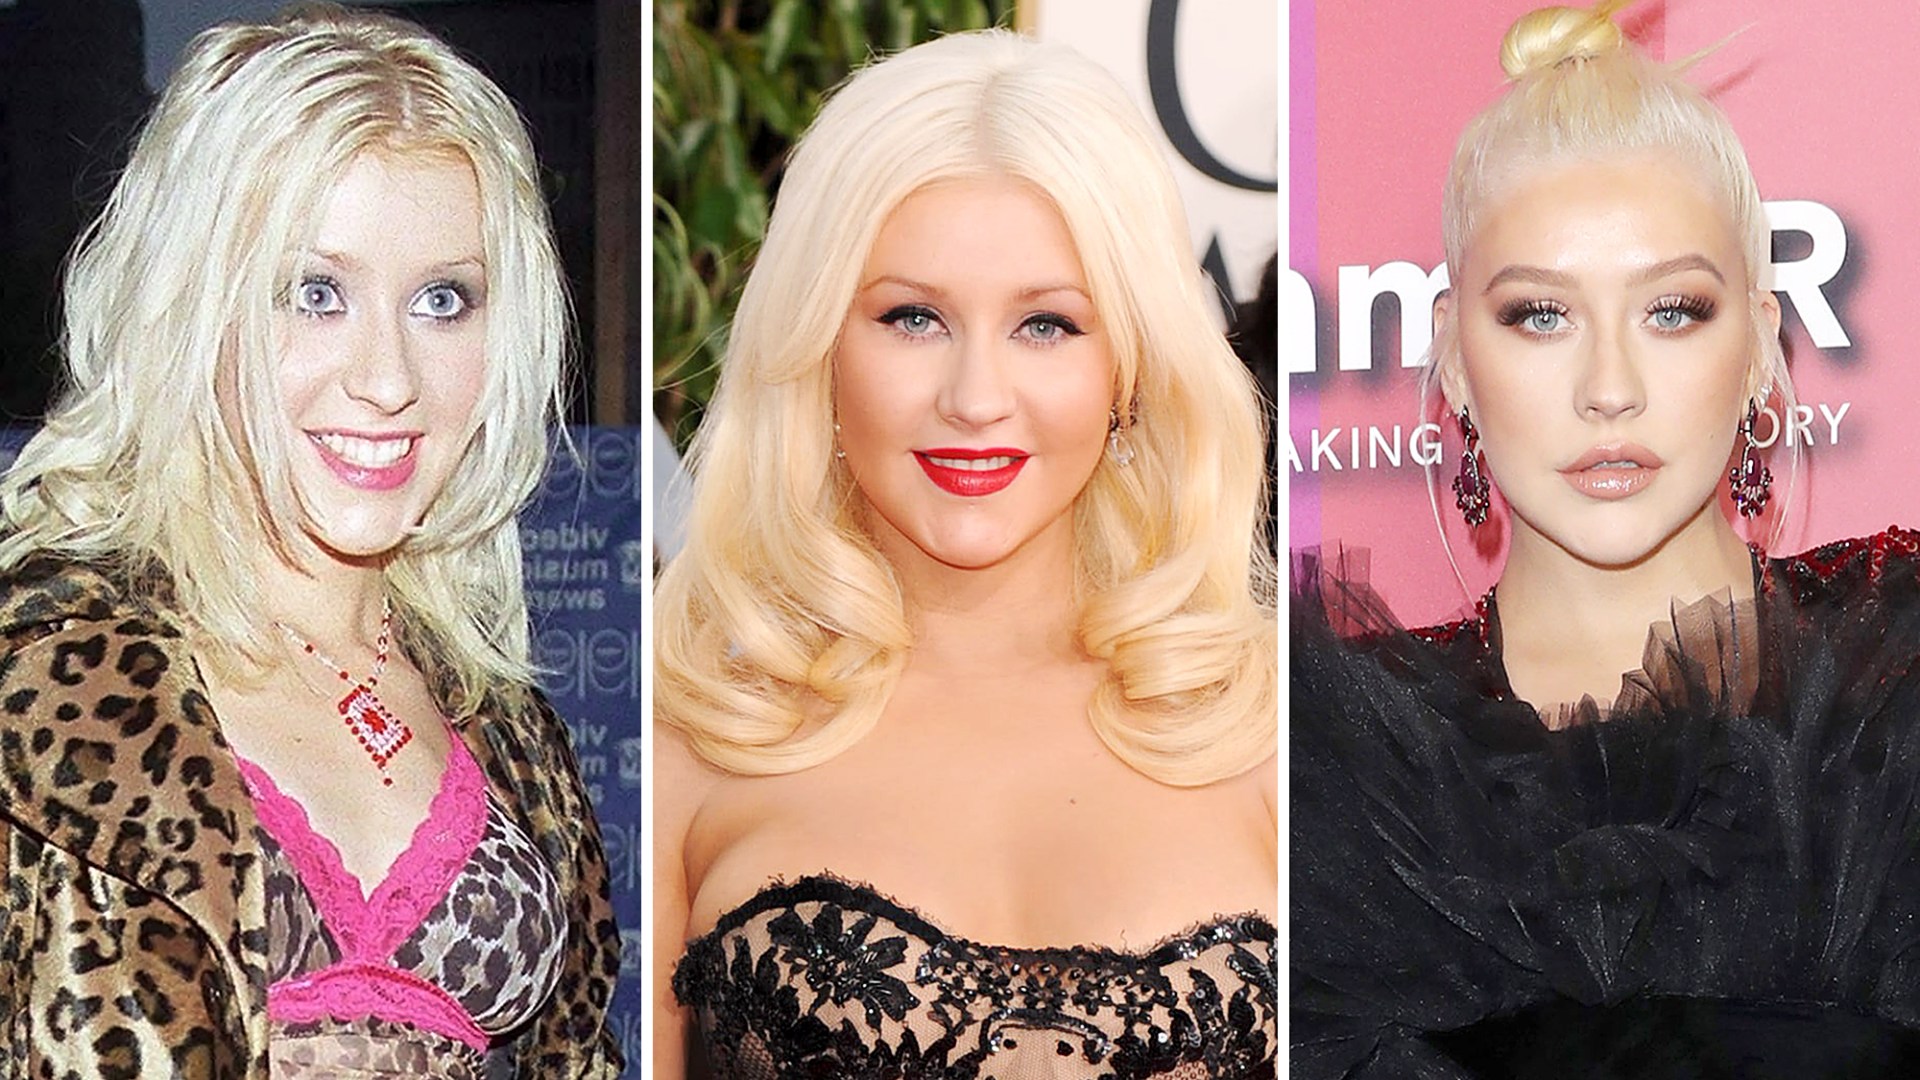 Christina Aguilera's Transformation See Photos Young to Now